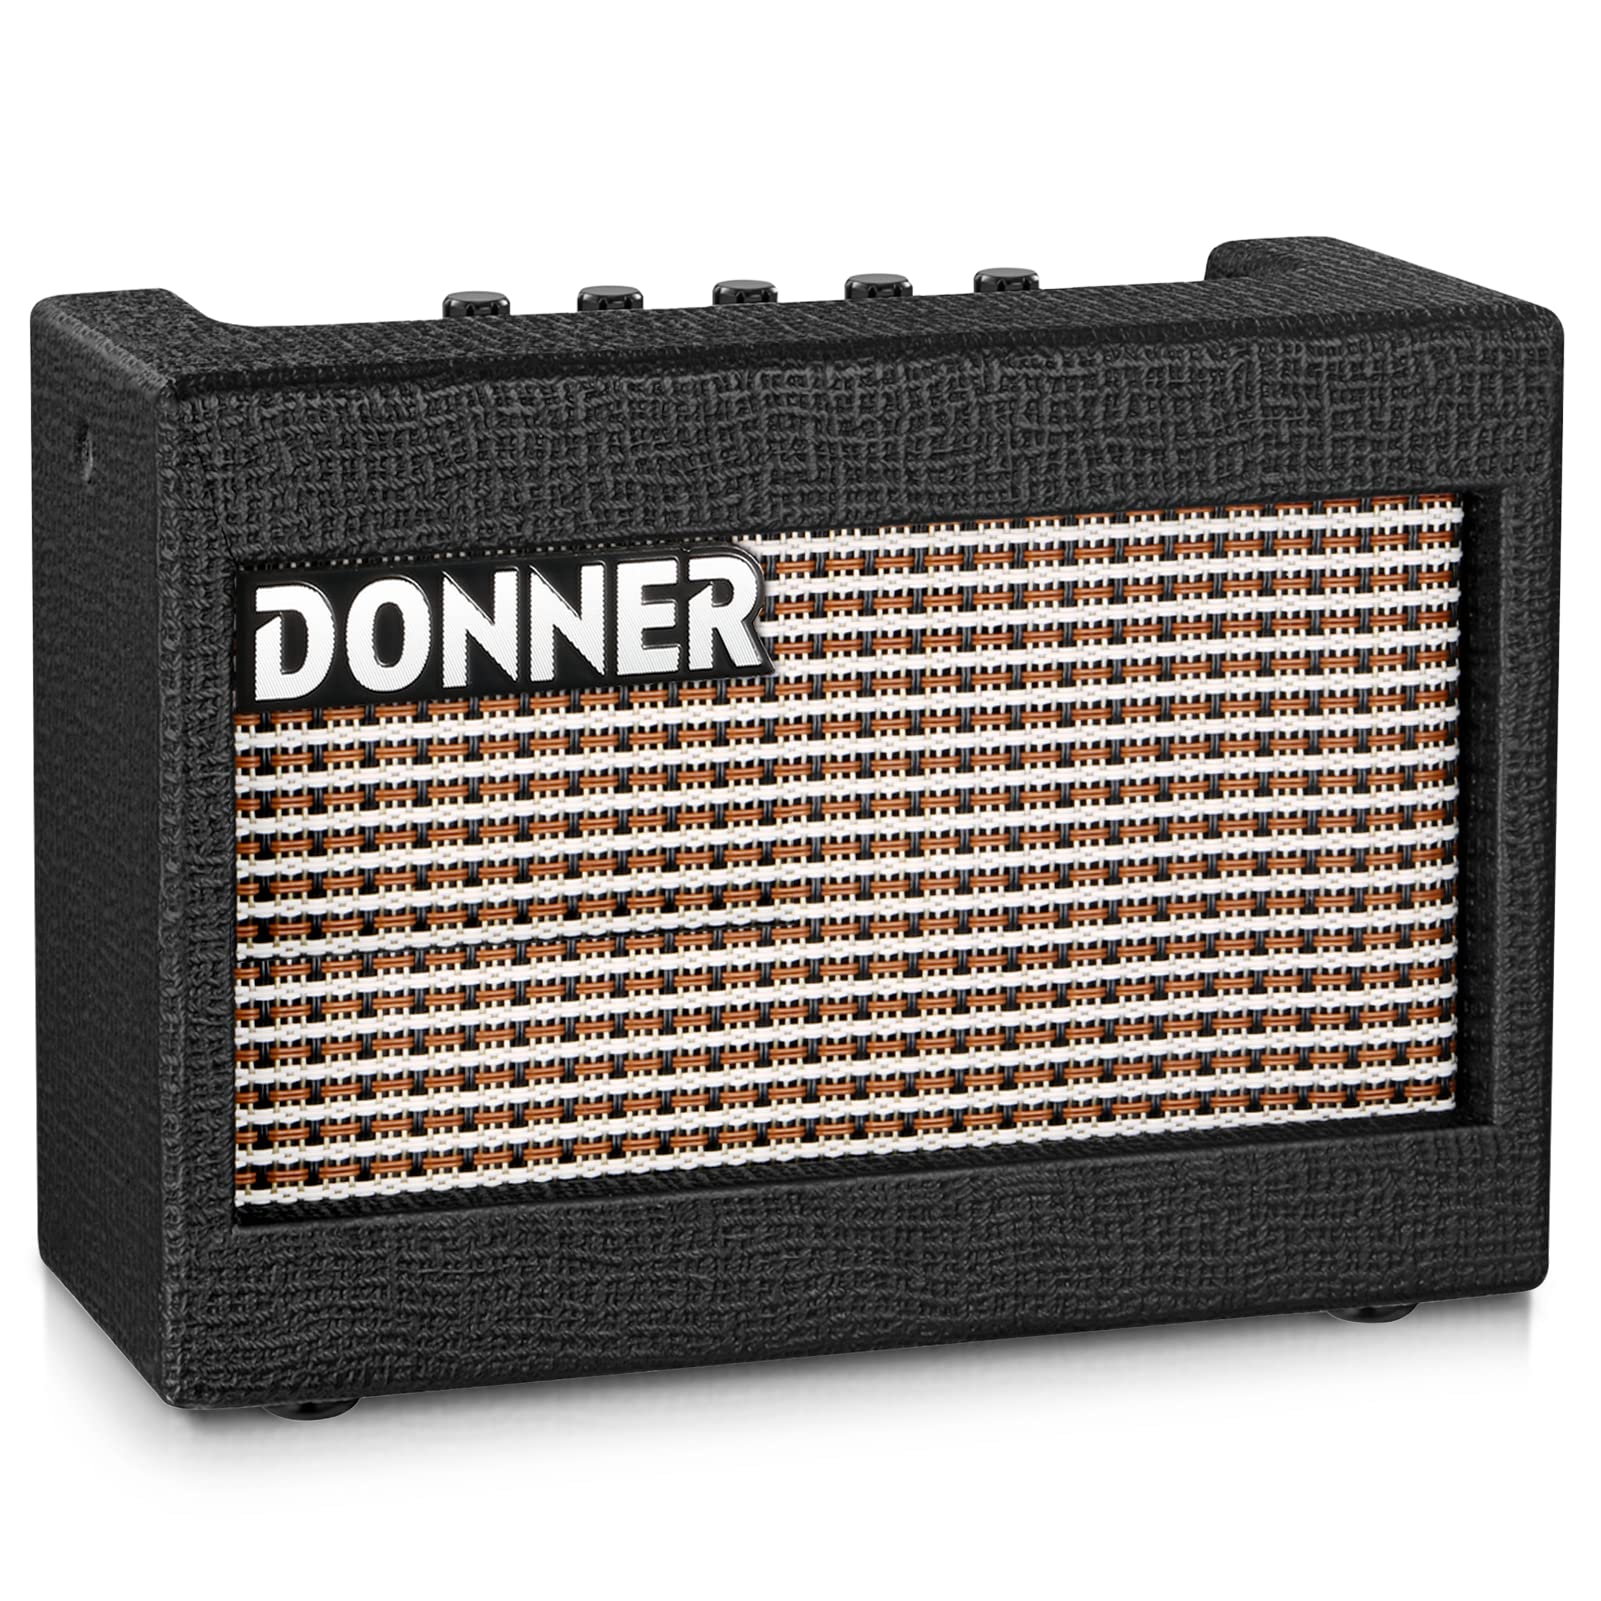 

Donner Mini Electric Guitar Amp Wooden 3W Small Guitar Amplifier M-3 Desktop Practice Guitar Speaker, Portable and Compact